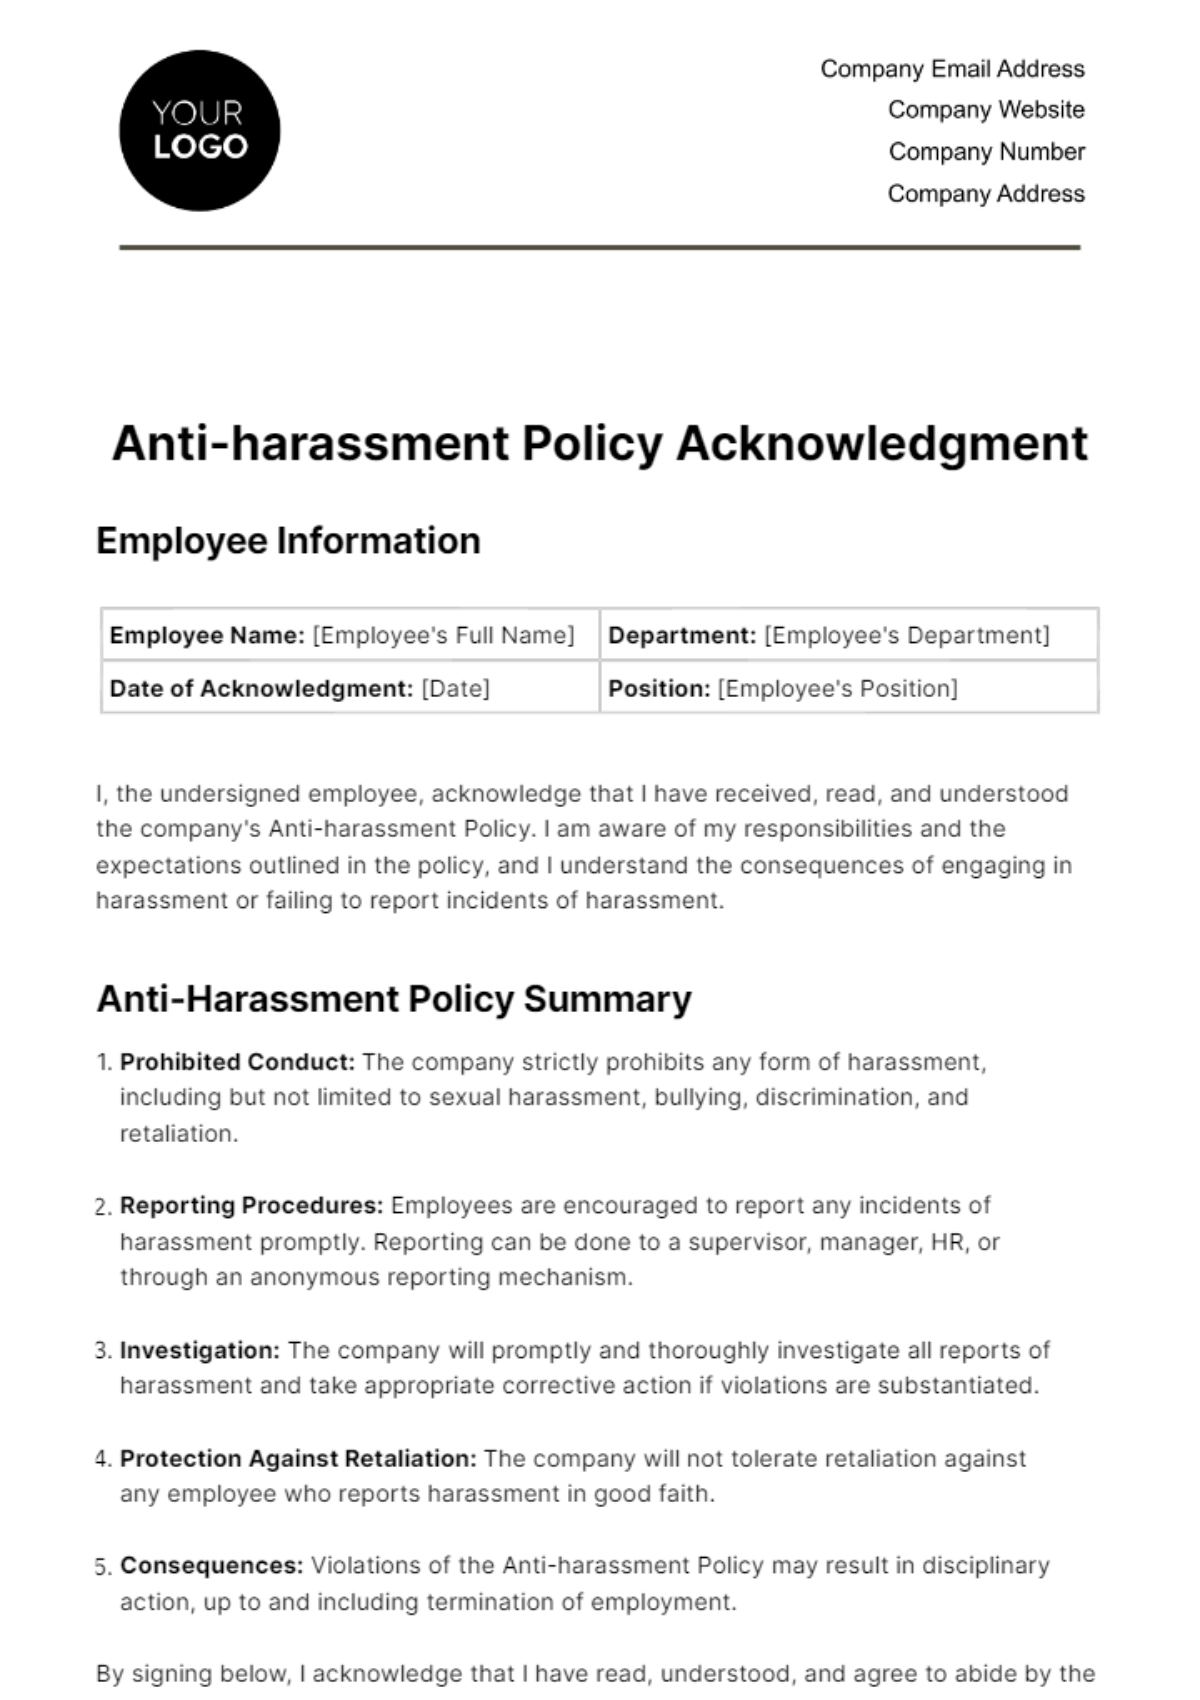 Free Anti-harassment Policy Acknowledgment HR Template